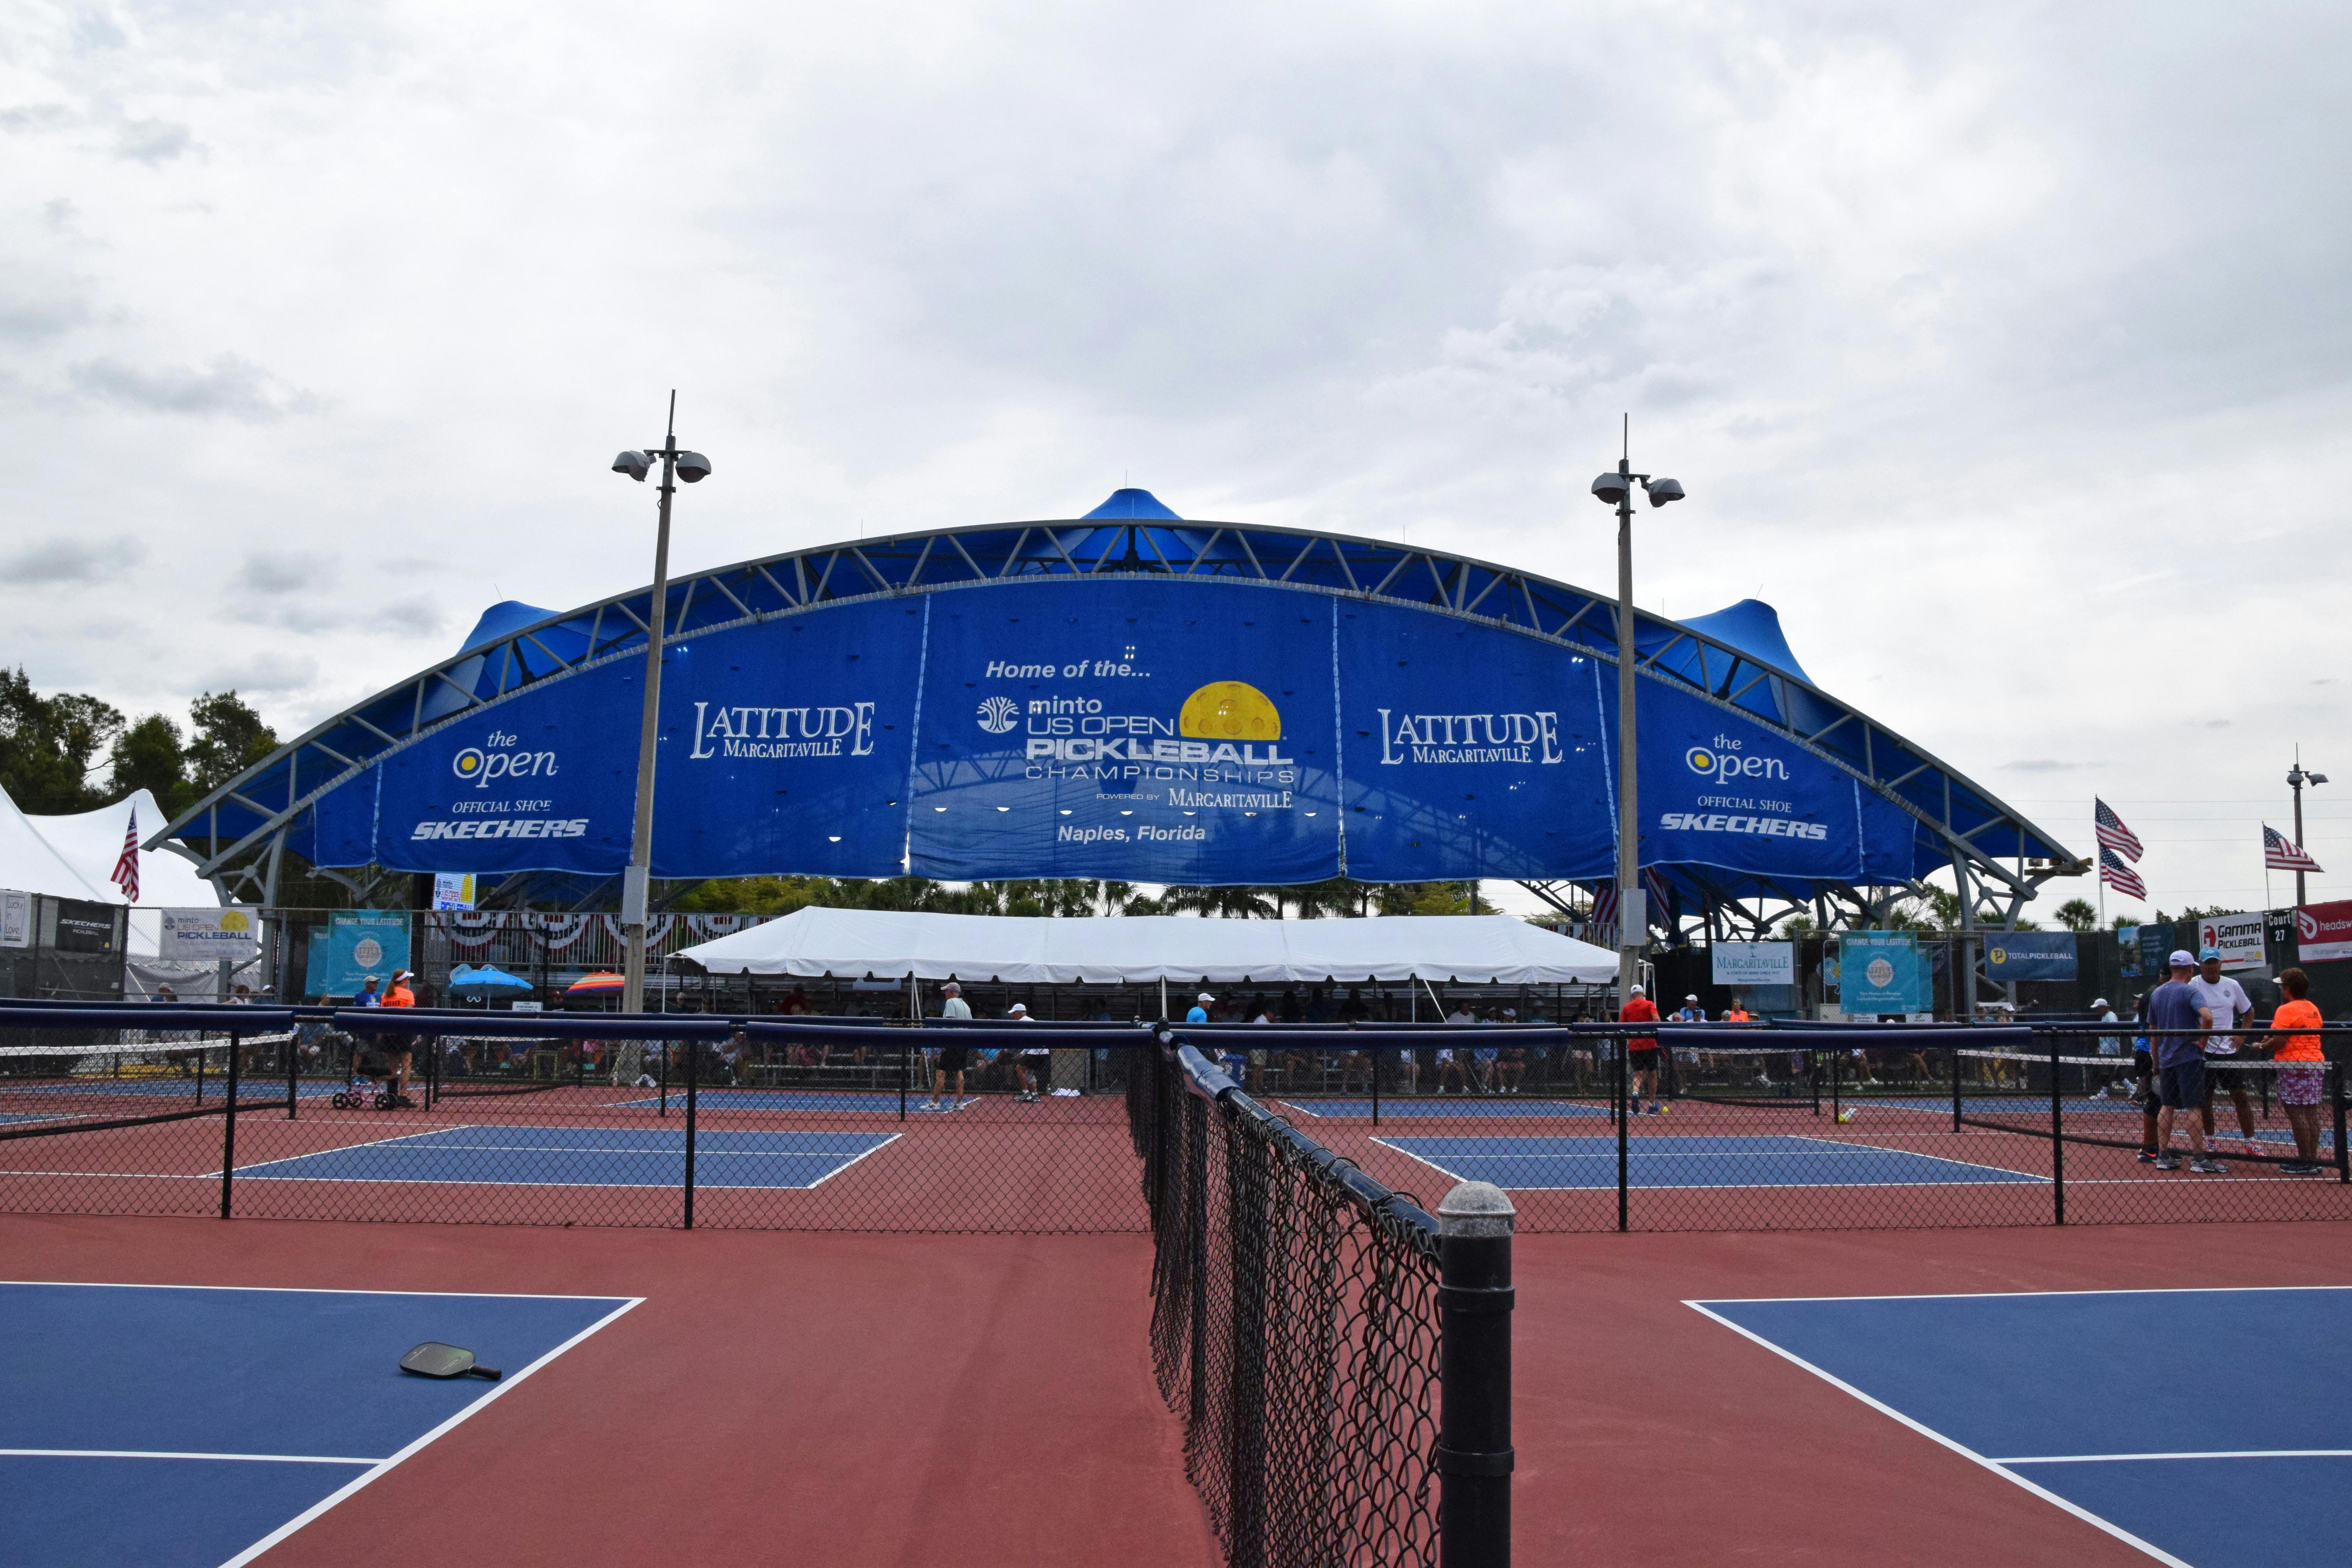 ARE YOU READY FOR THE US OPEN PICKLEBALL CHAMPIONSHIPS?